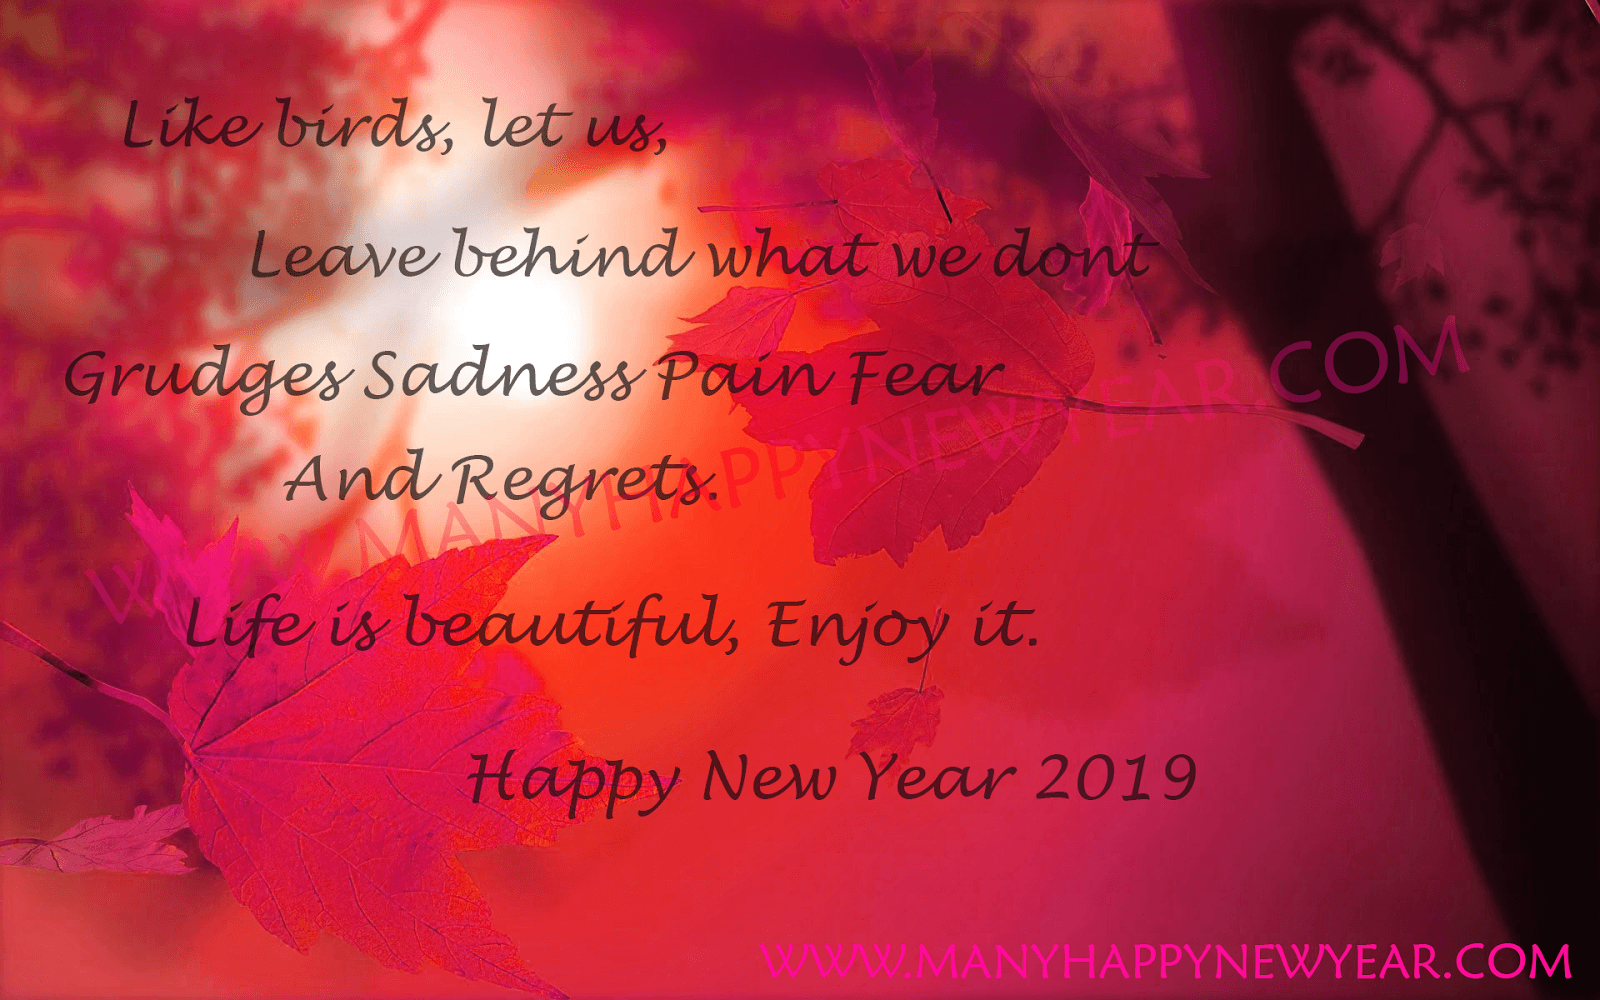 New Year 2019 Quotes Image, Photo, Wallpaper. New Year Time